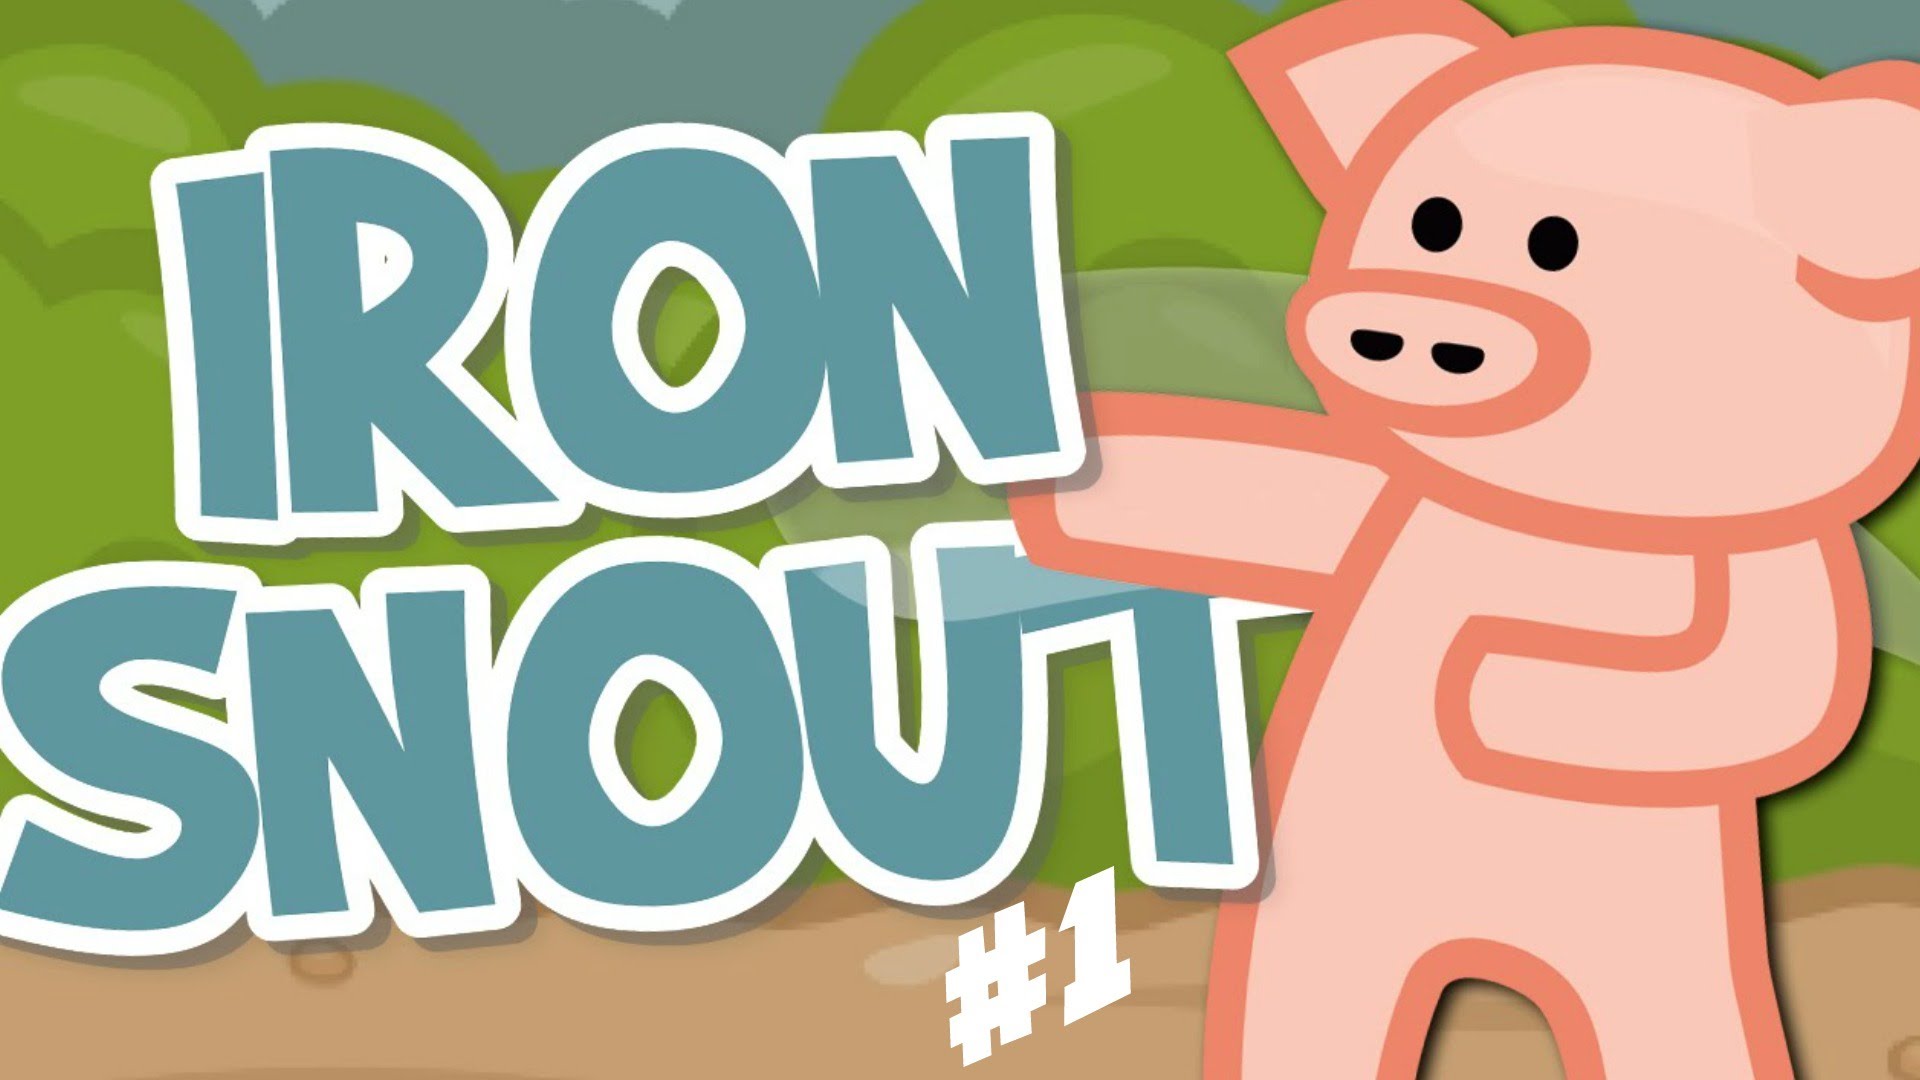 IRON SNOUT - Play Online for Free!